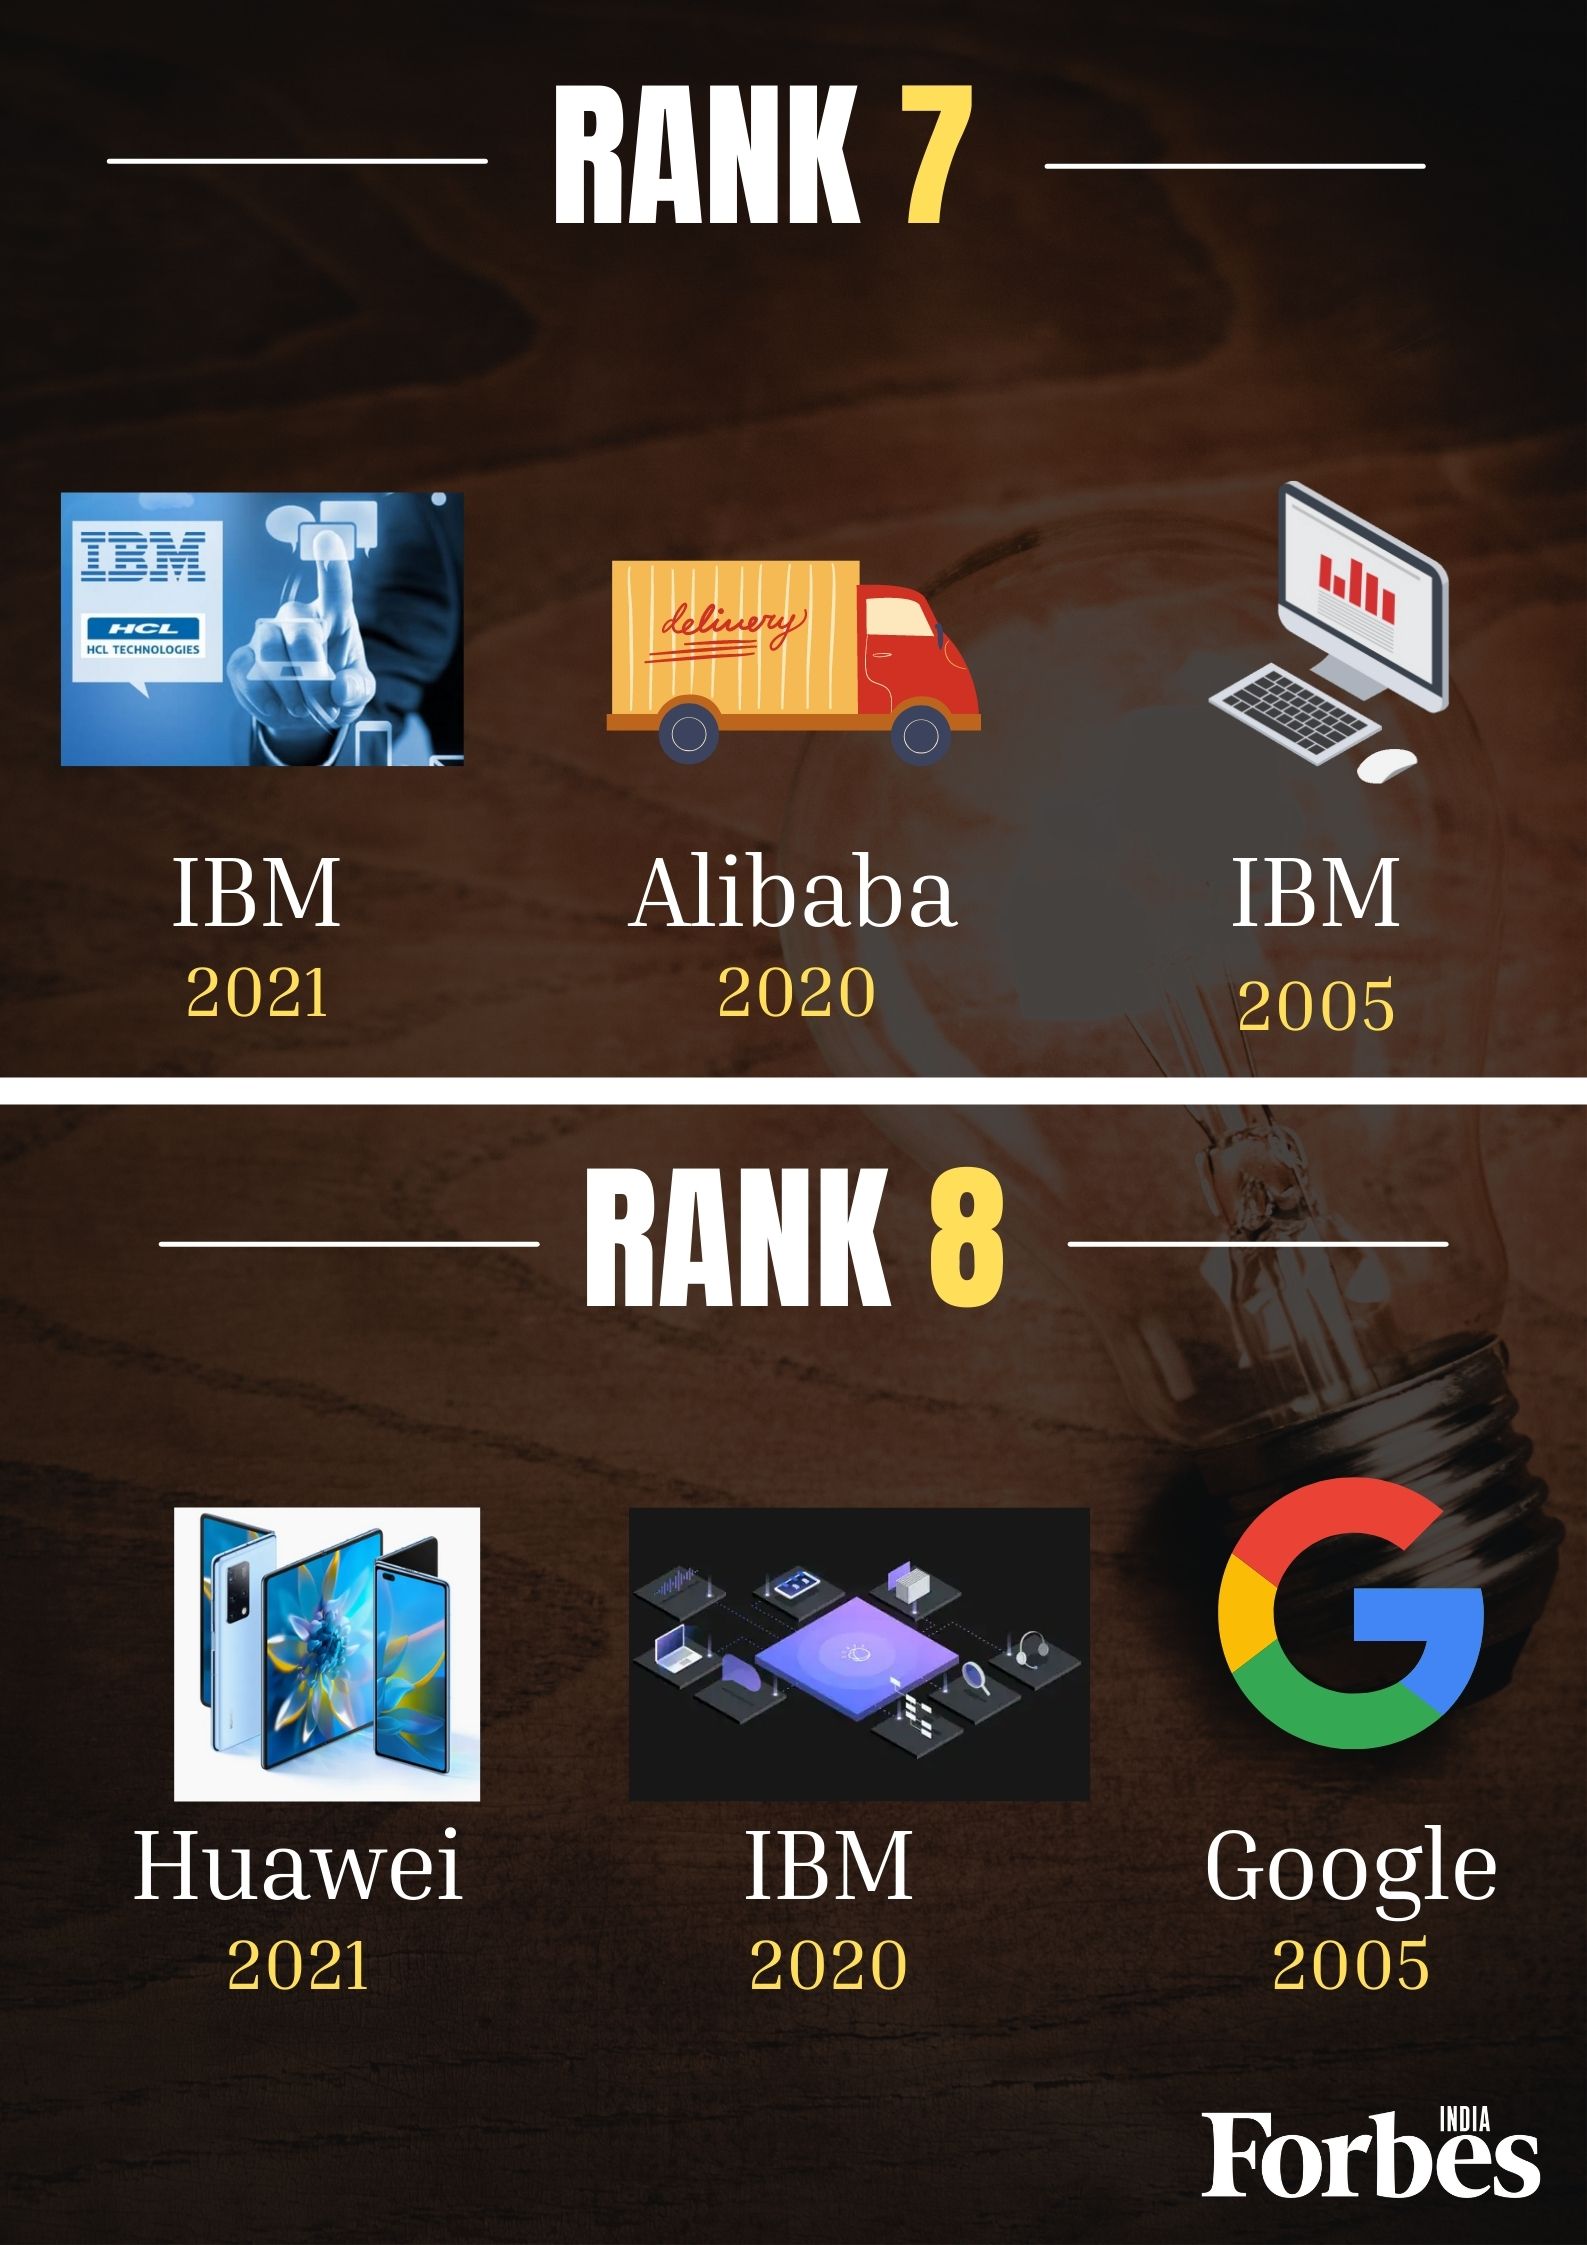 Apple most innovative company in the world. Meet the top 10